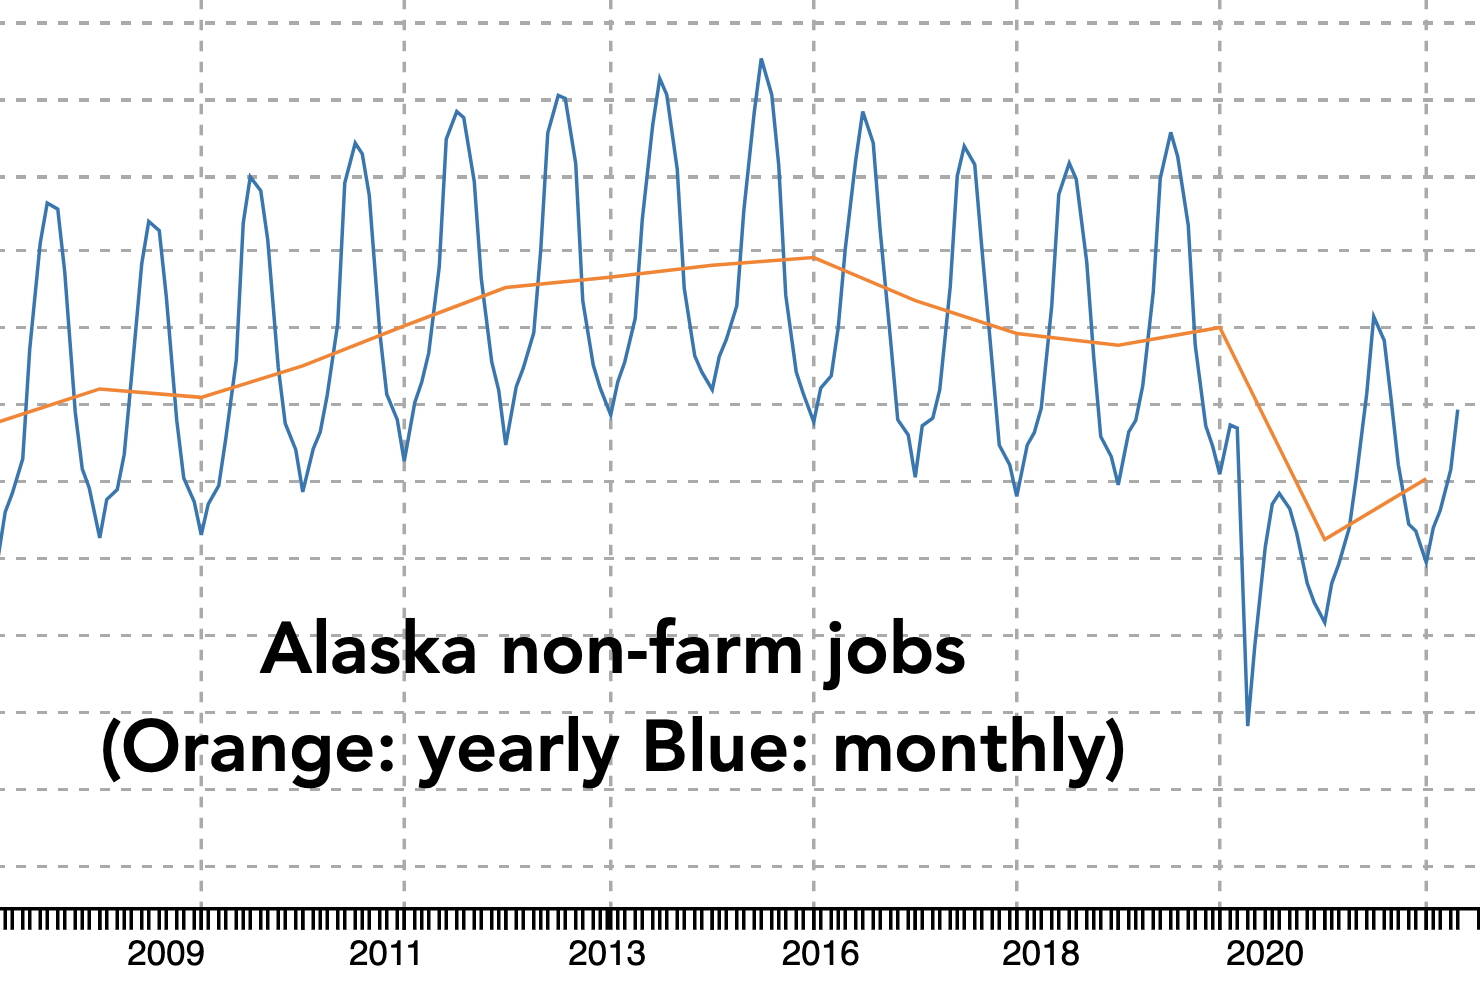 A chart shows statewide non-farm jobs since 2007 which remained relatively stable until the sharp drop caused by the COVID-19 pandemic in 2020. While the total has recovered somewhat, employment is still well below pre-pandemic levels and state labor officials said they cannot yet project if and for how long the increase in recovery will continue, (Alaska Department of Labor)